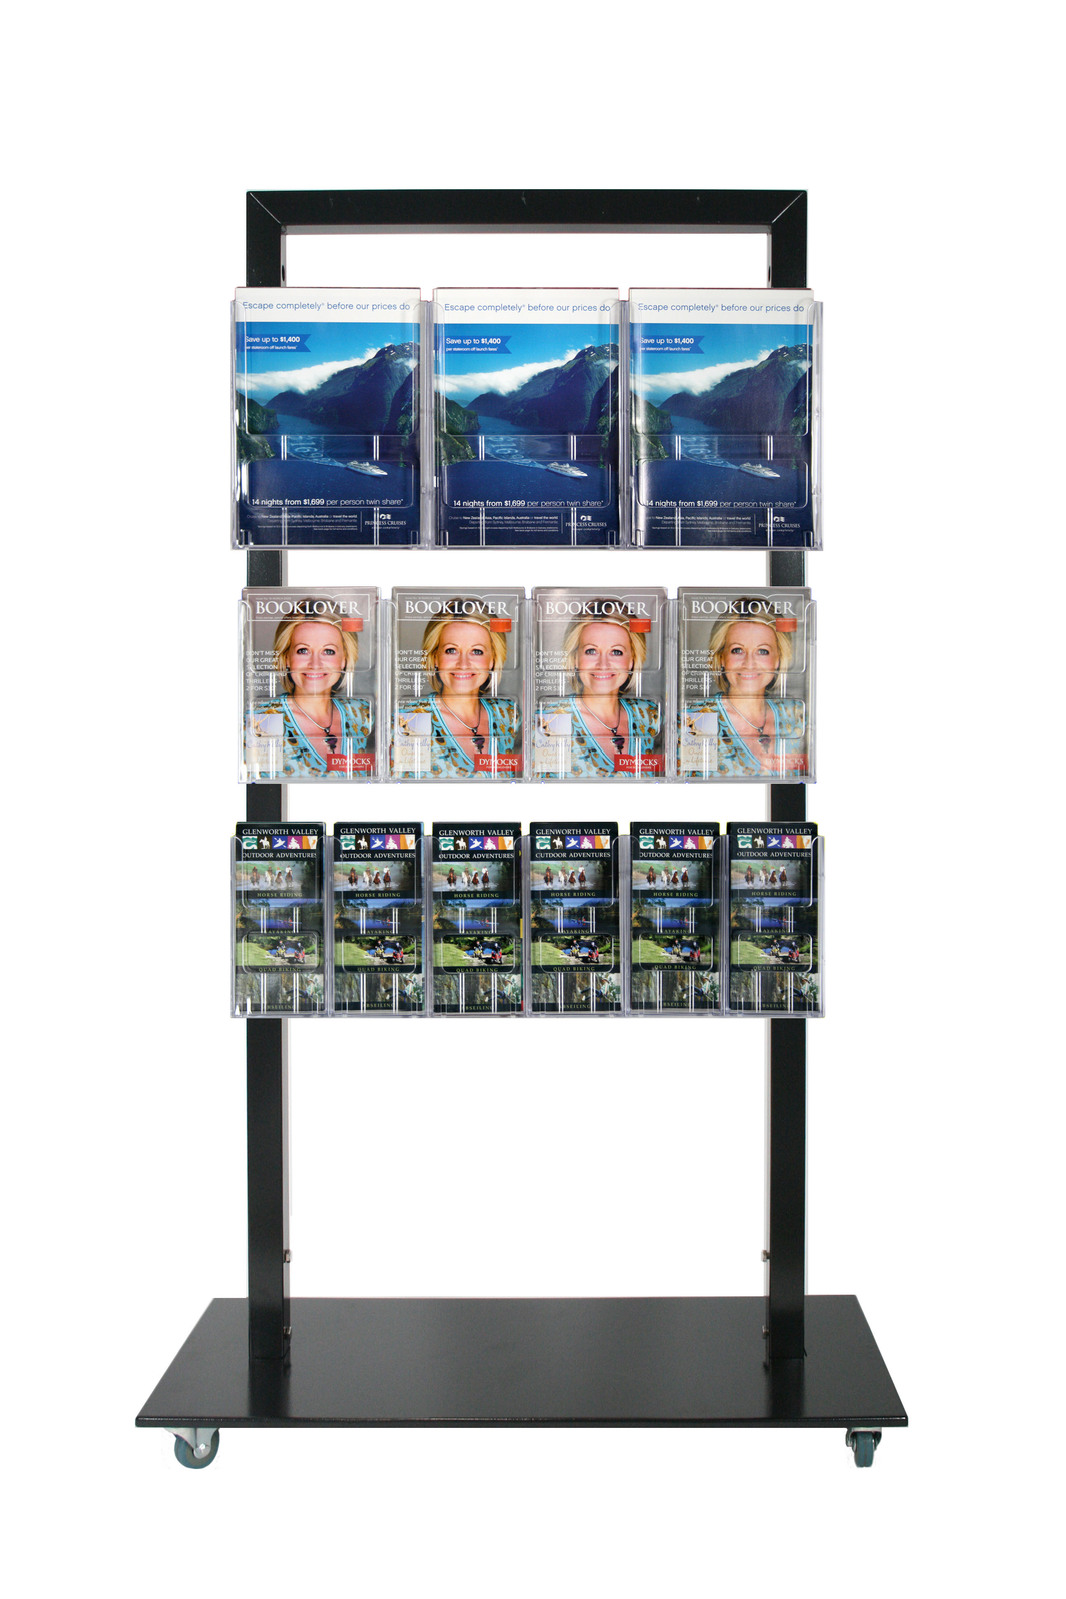 Black Mall Stand - with 3 A4, 4 A5 and 6 DL Brochure Holders